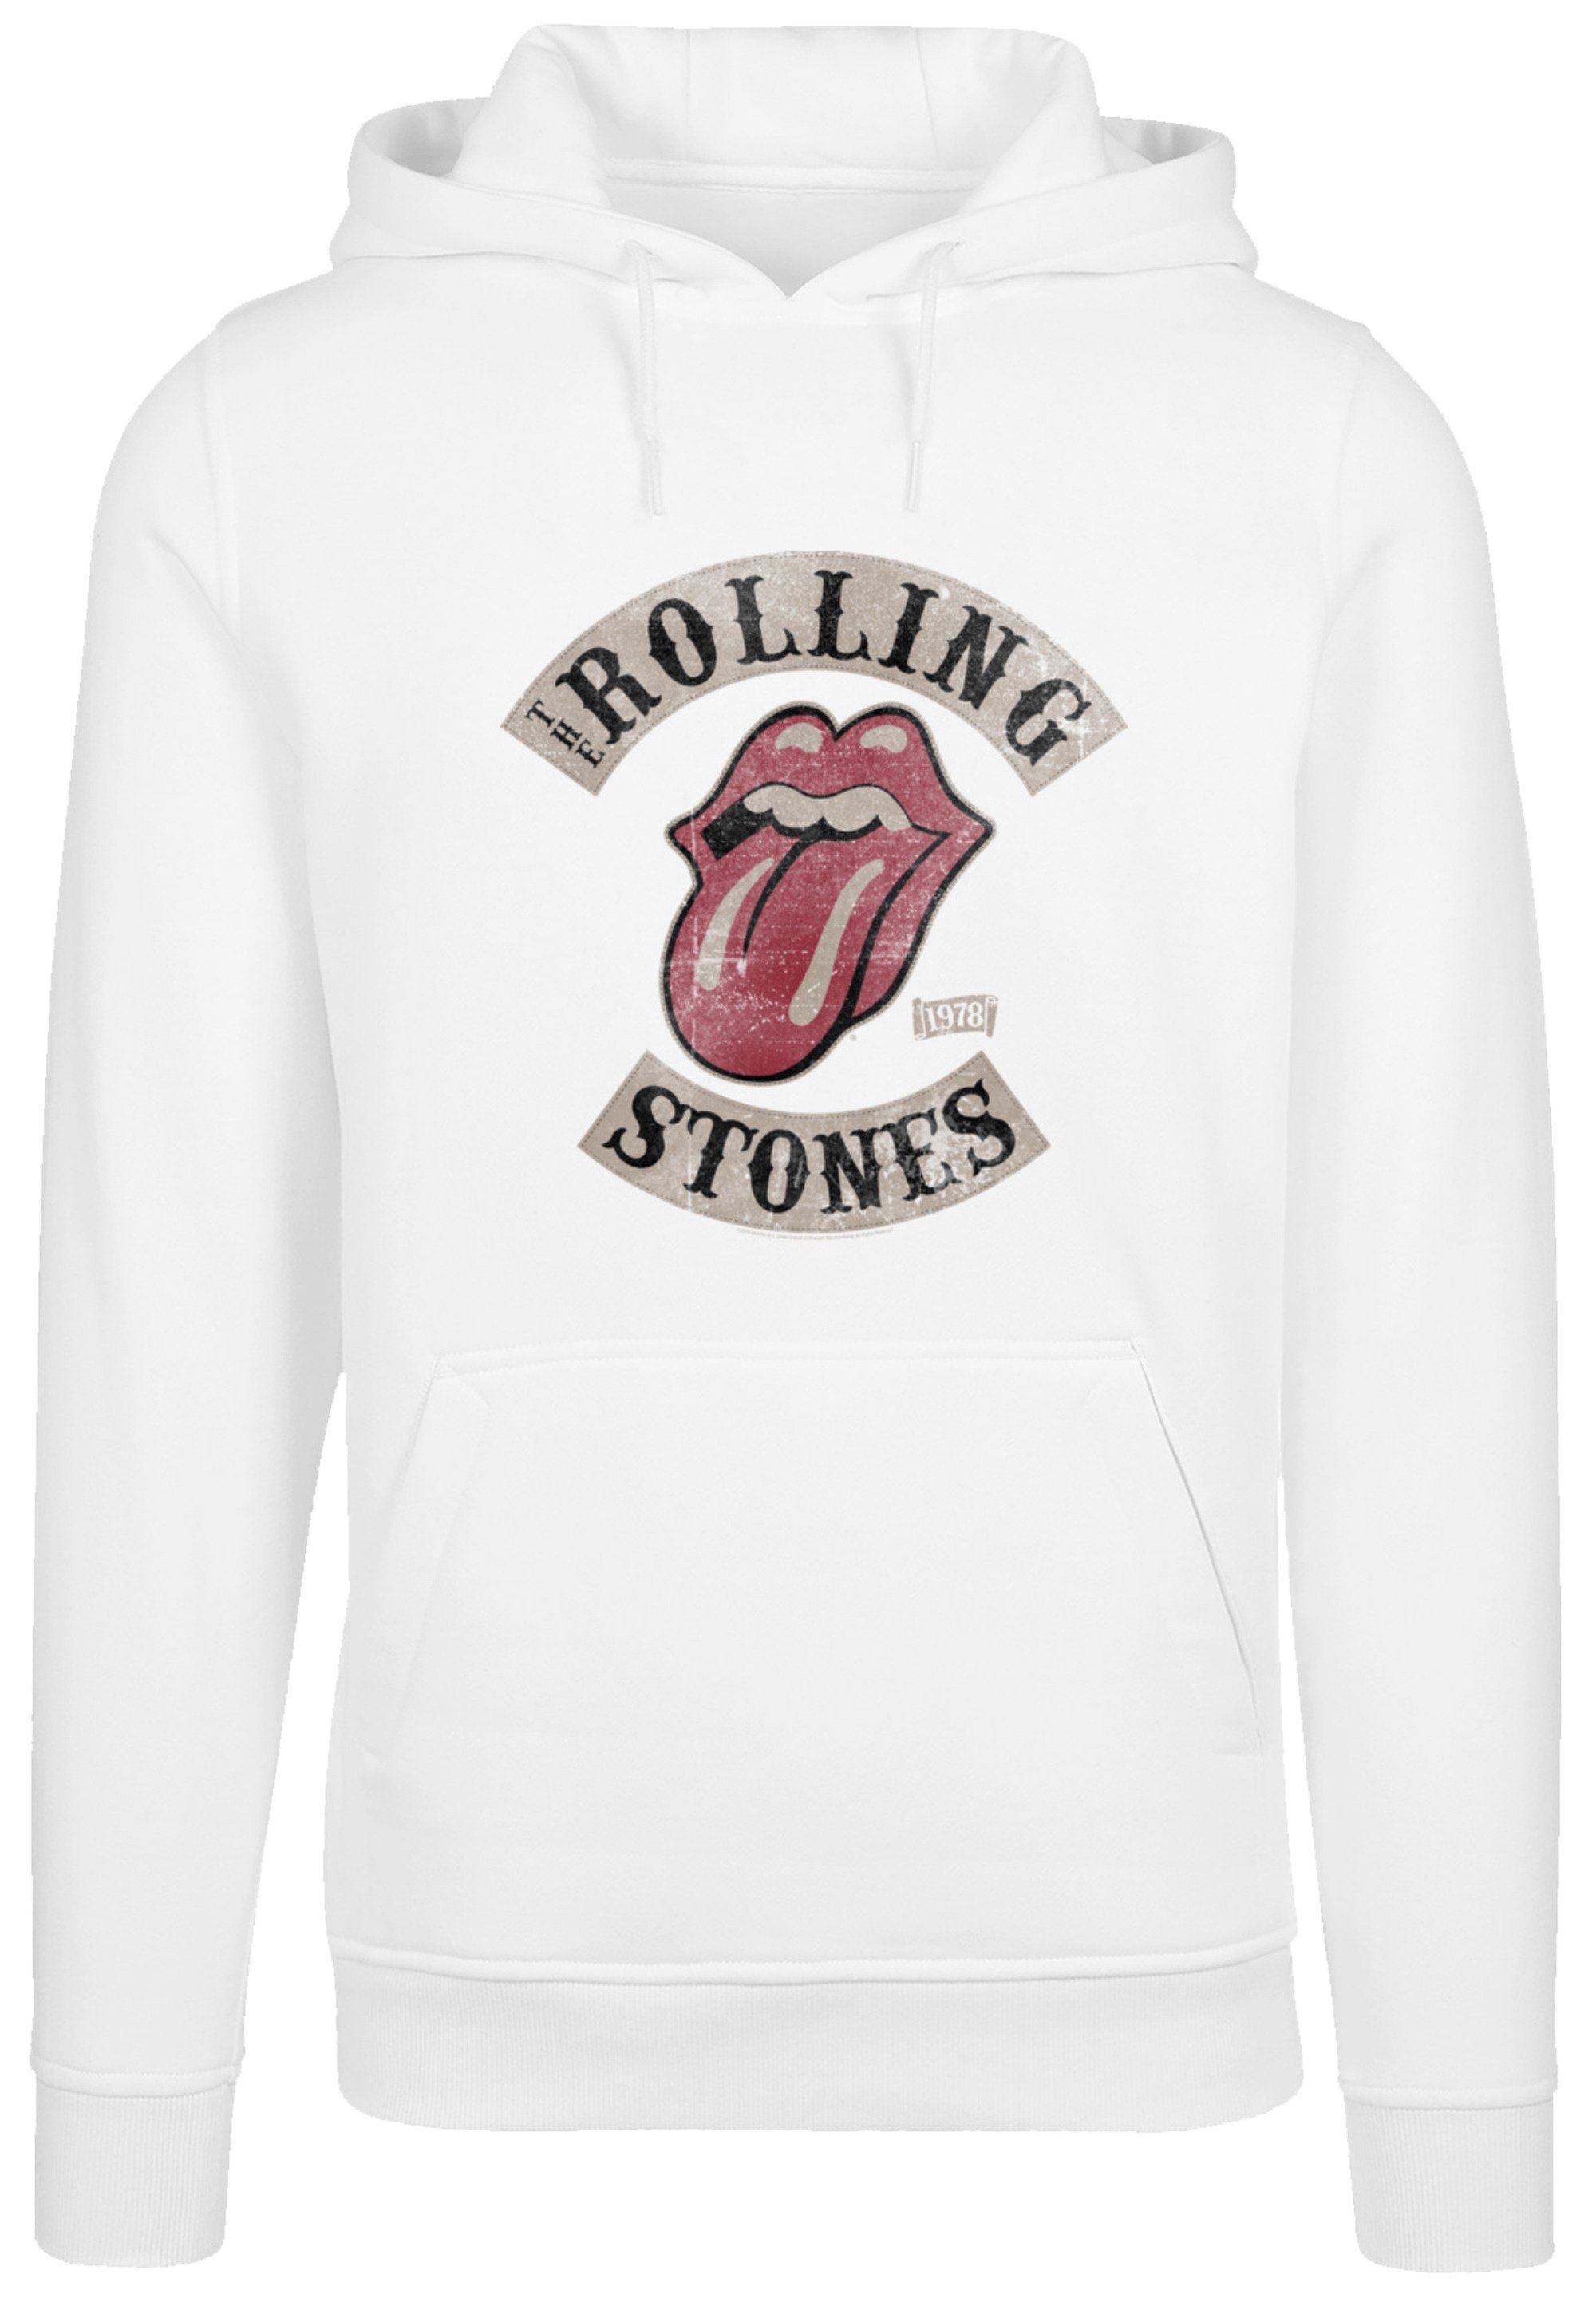 Musik Stones Kapuzenpullover Rolling Hoodie, Tour weiß Rock F4NT4STIC Warm, The Band Bequem